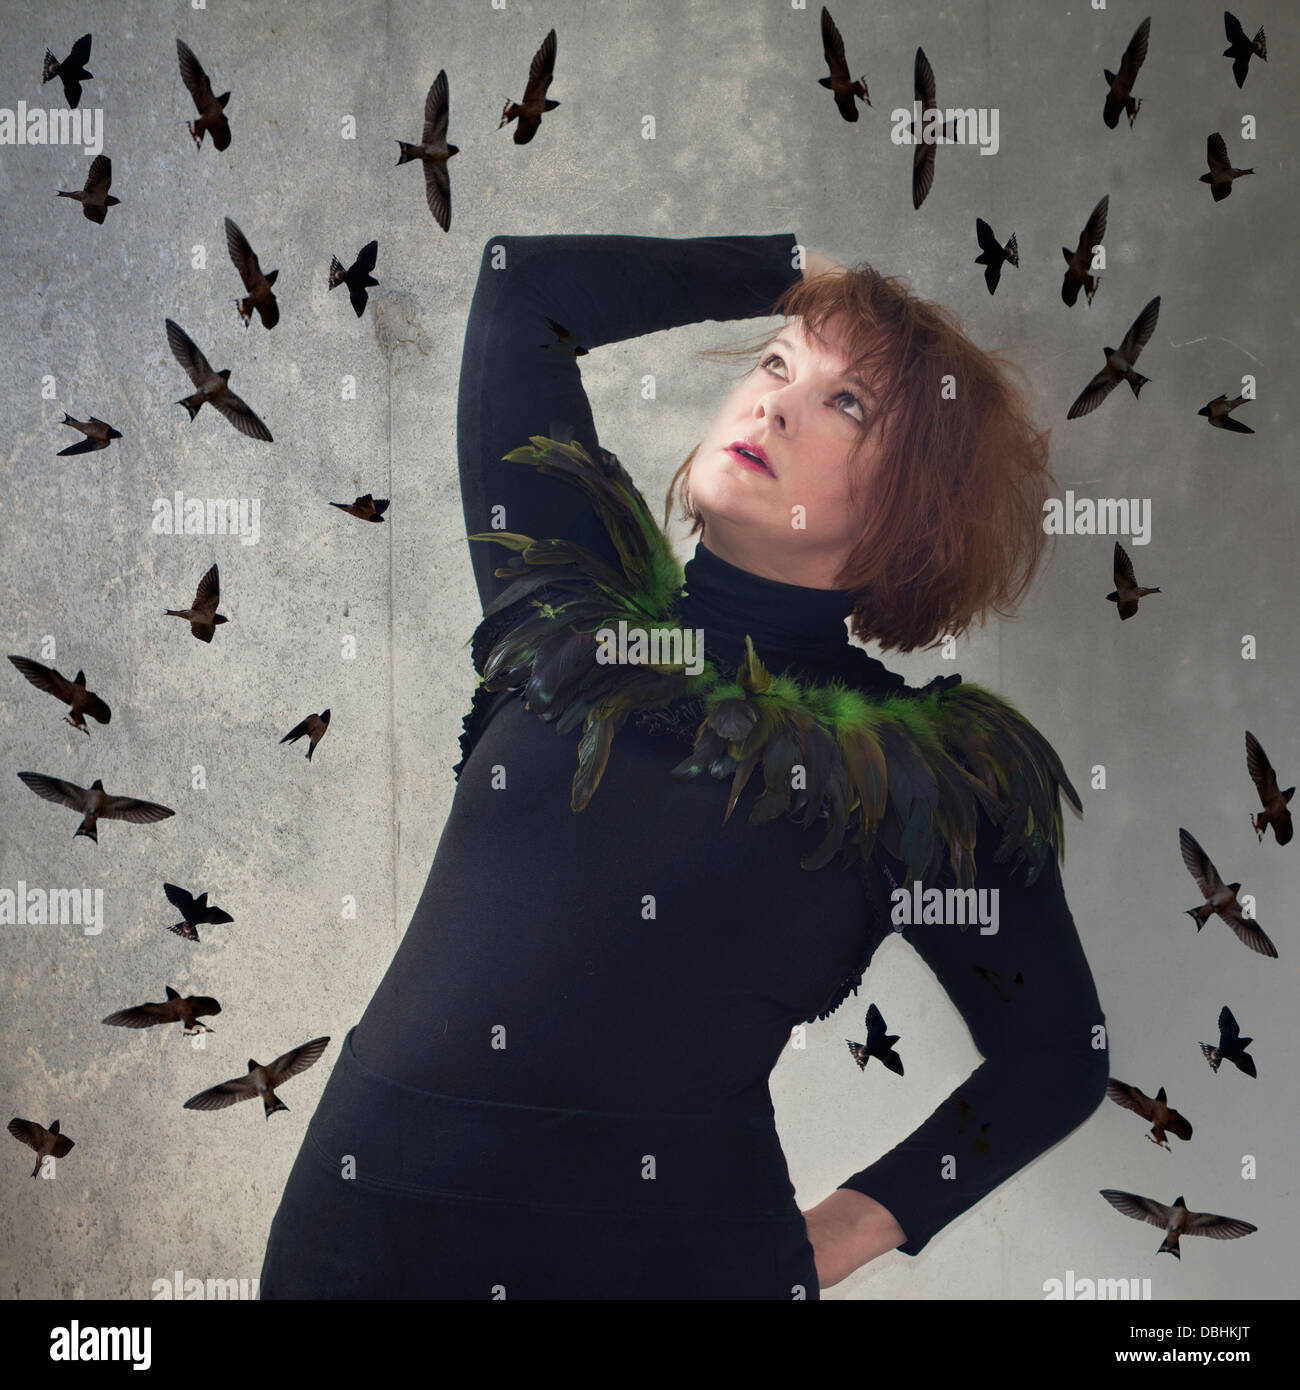 Woman surrounded by birds on a gray background. Stock Photo